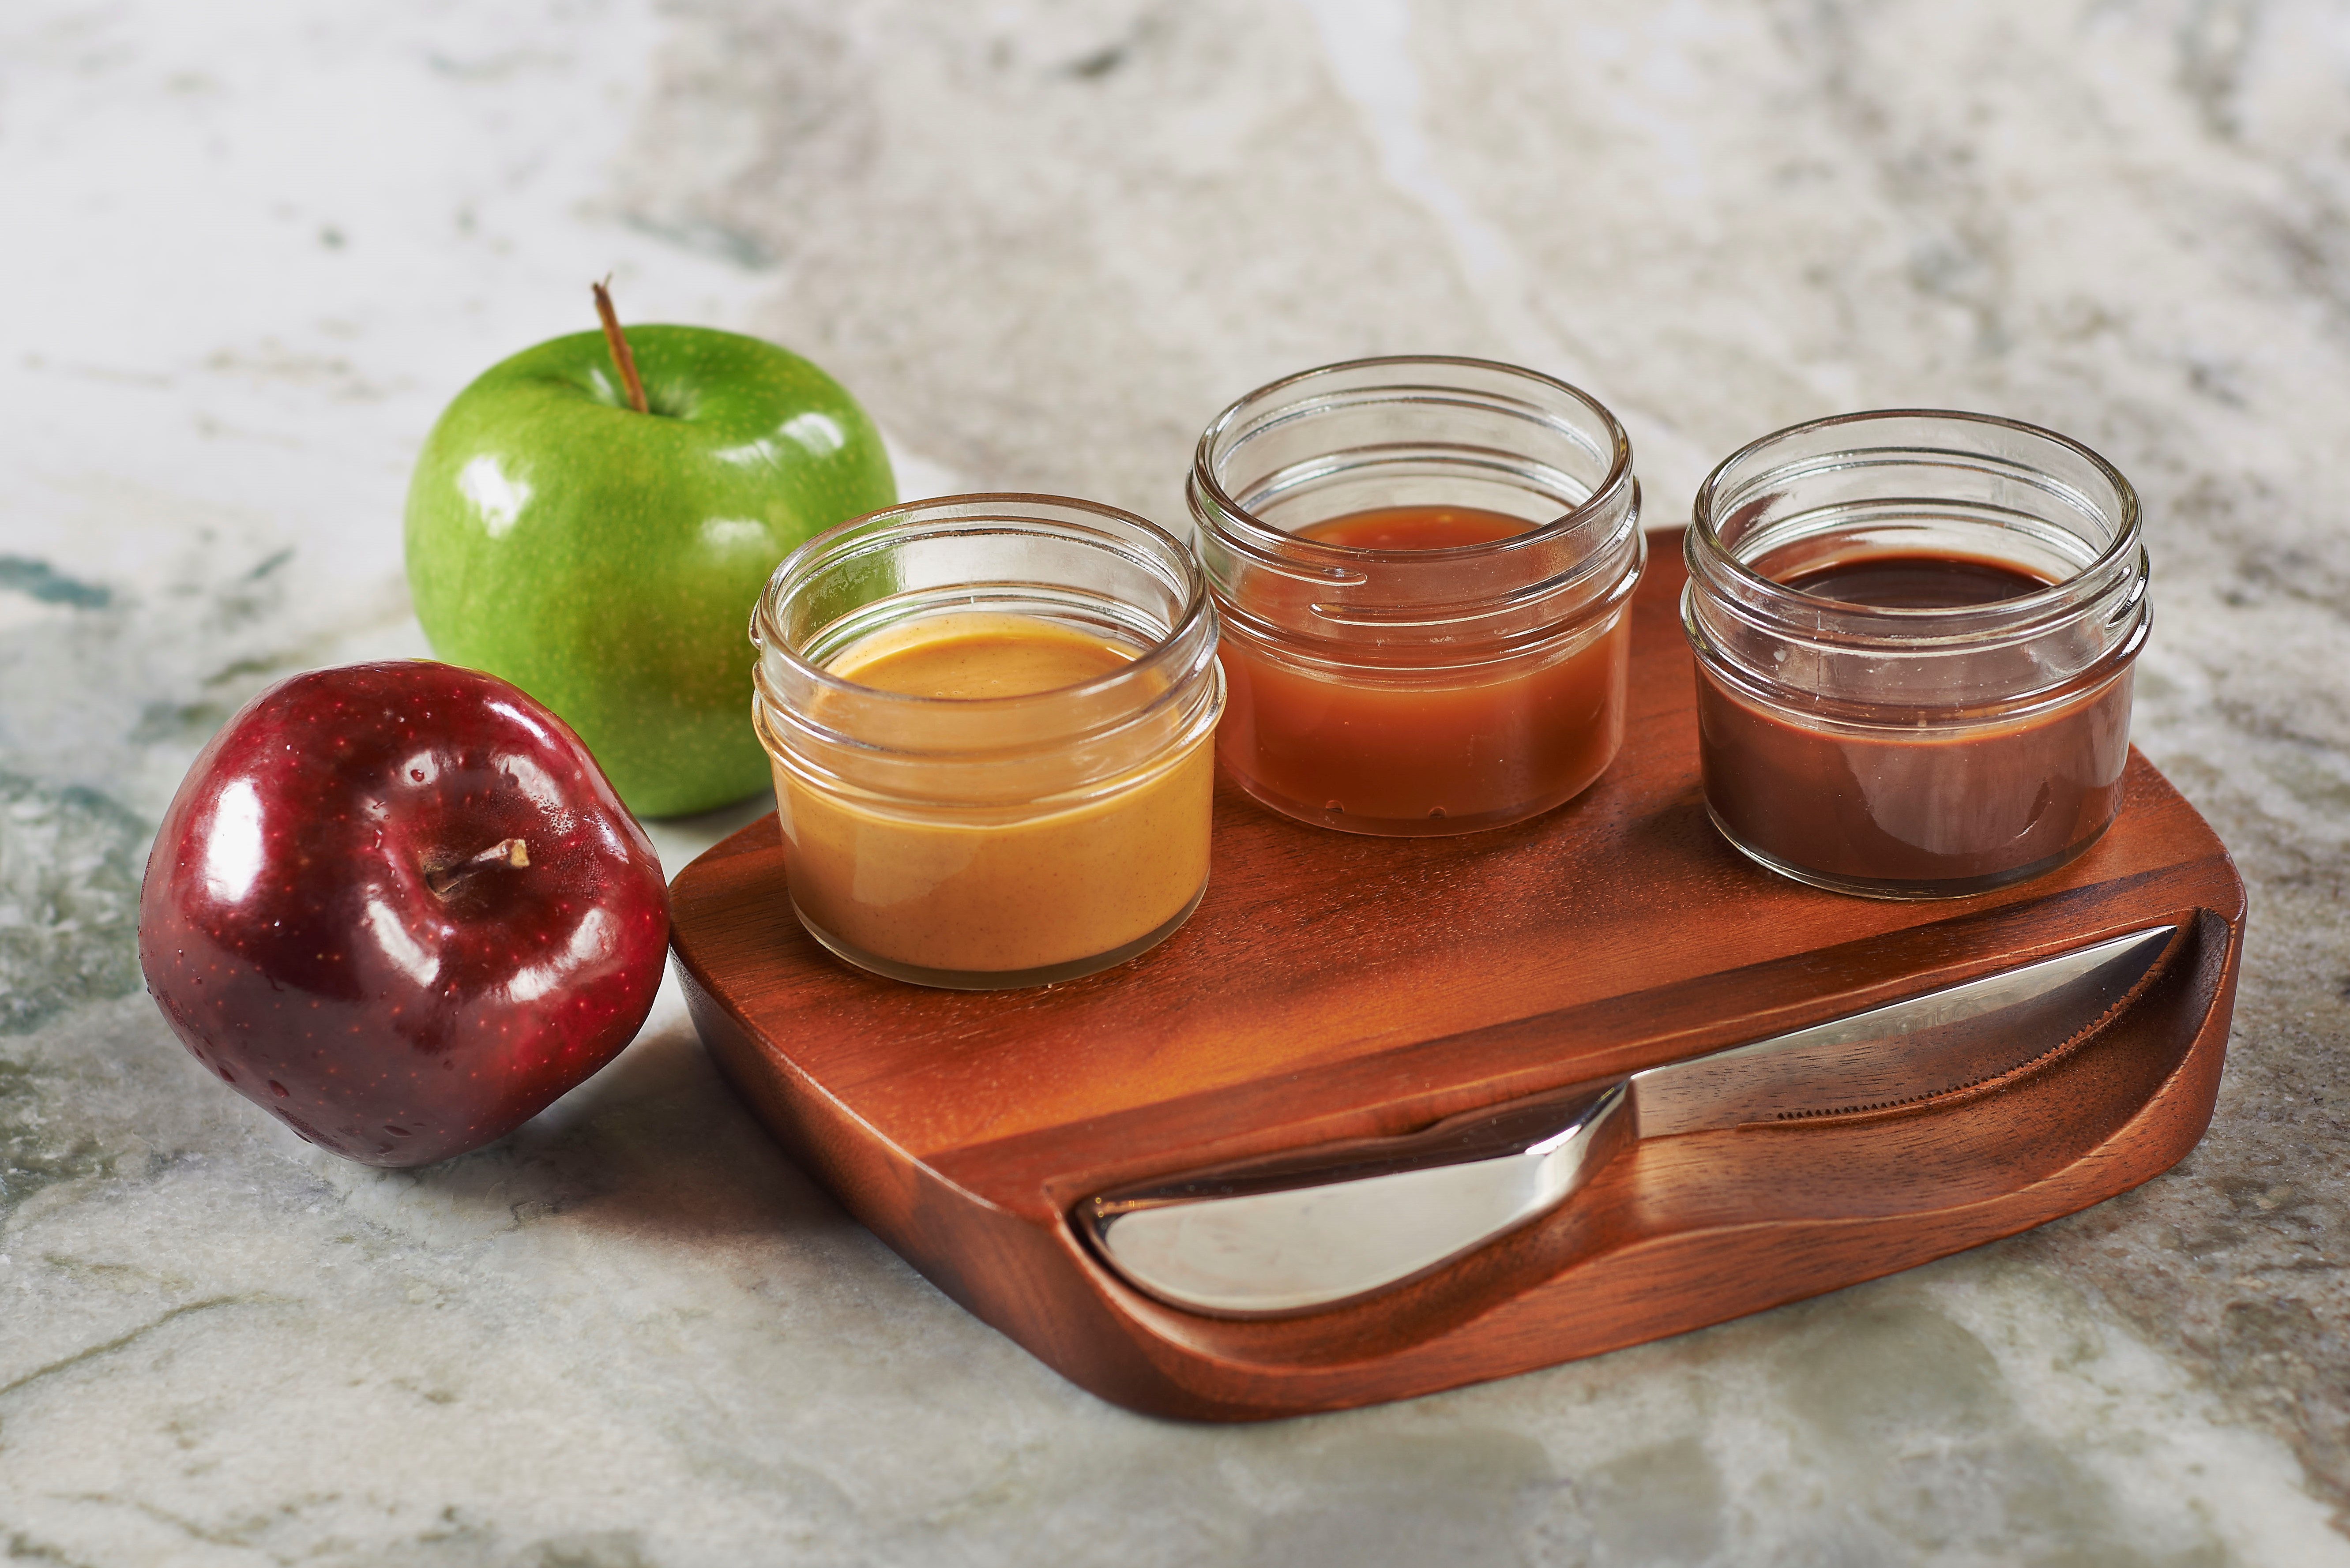 Apples with jars of caramel, chocolate, and peanut butter.